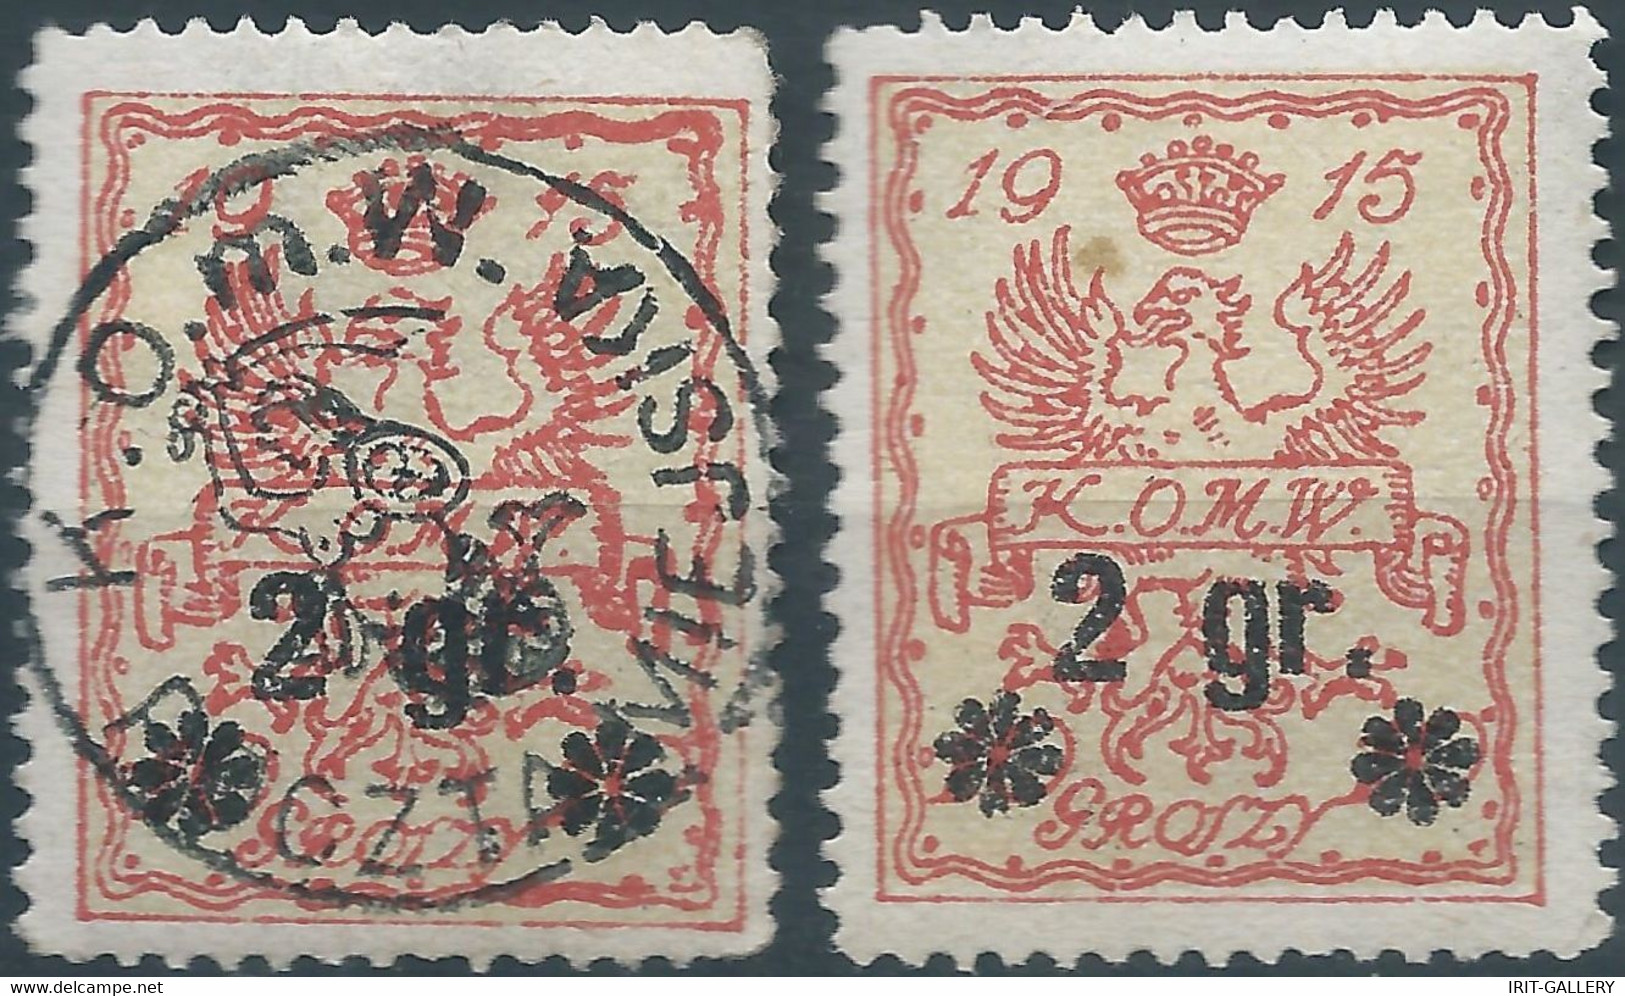 POLONIA-POLAND-POLSKA,1915 Warsaw Local Issues,10 GROSZY/ 2 GR,Obliterated And Mint - Nuevos